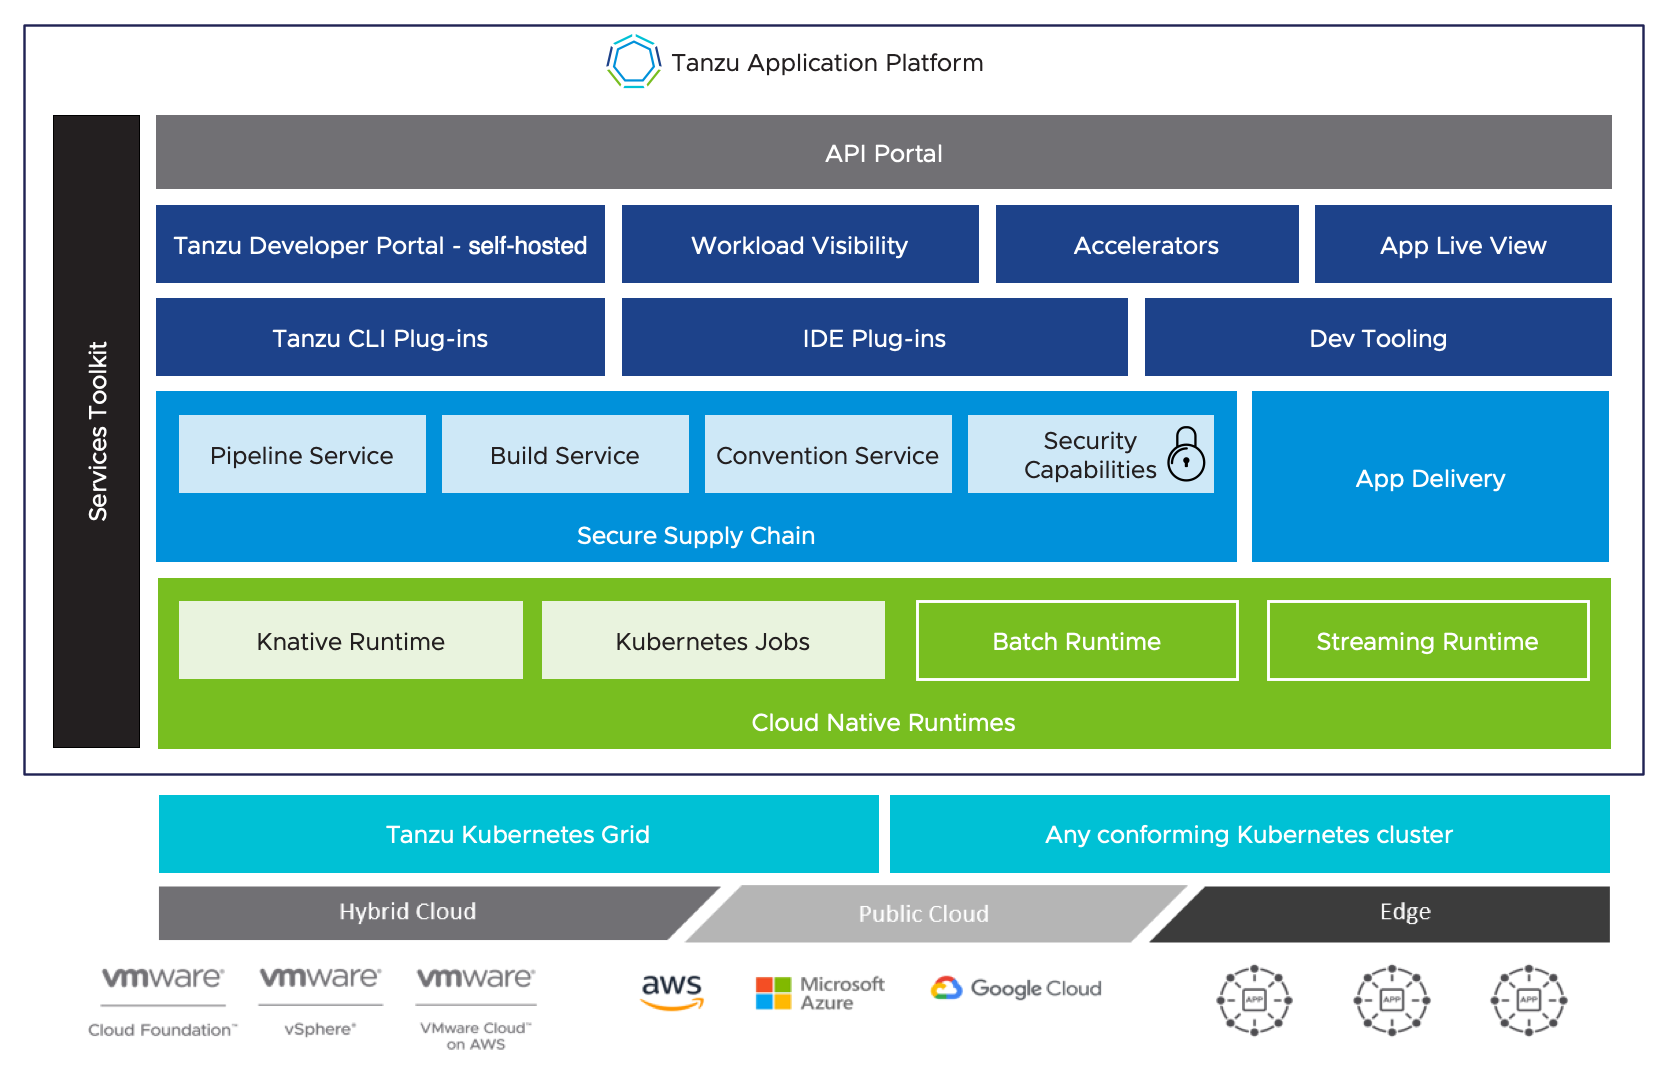 Diagram depicting the layered structure of Tanzu Application Platform.